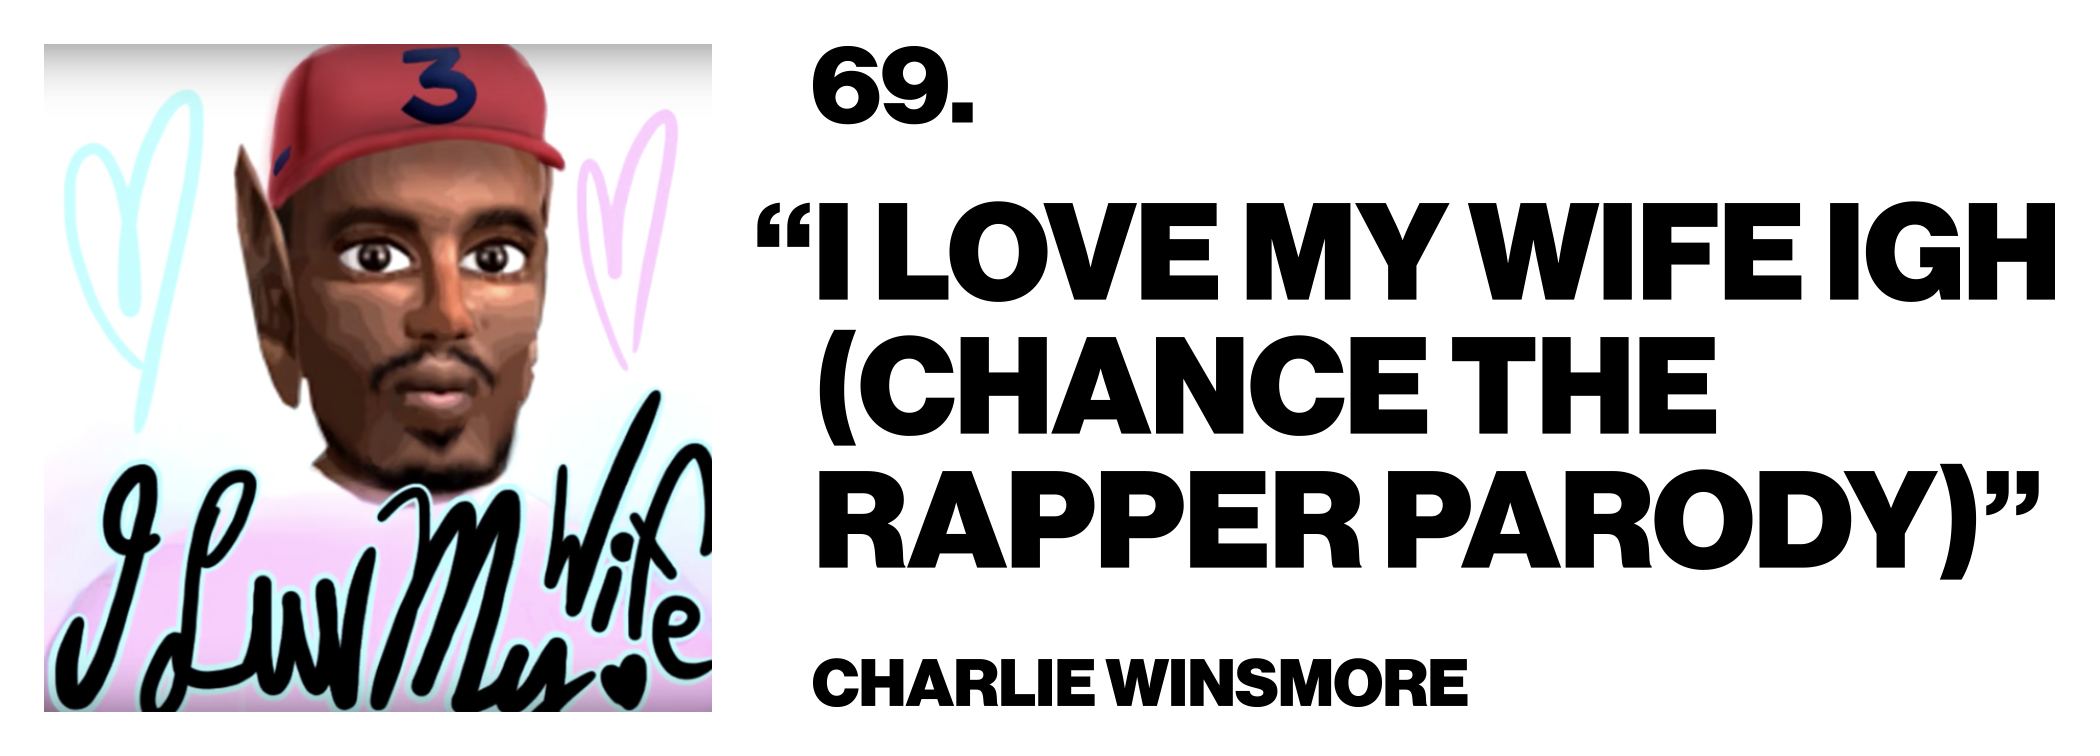 1576621805714-69-Charlie-Winsmore-_I-Love-My-Wife-IGH-Chance-the-Rapper-Parody_